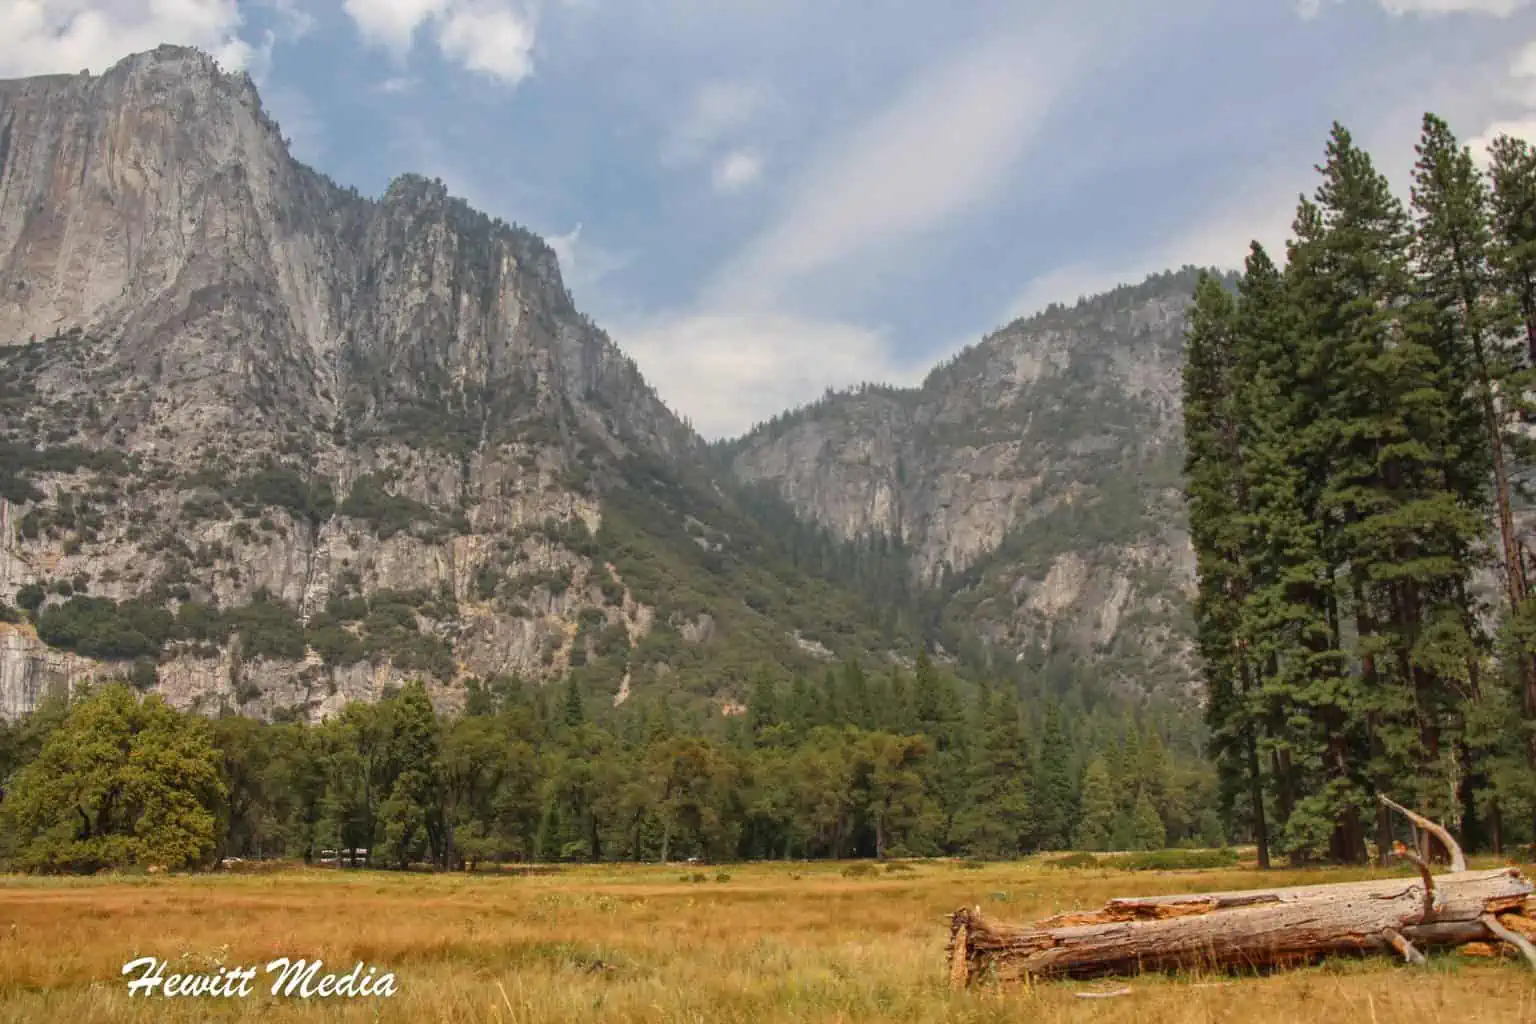 Best Hikes in the National Parks - Cloud's Rest in Yosemite